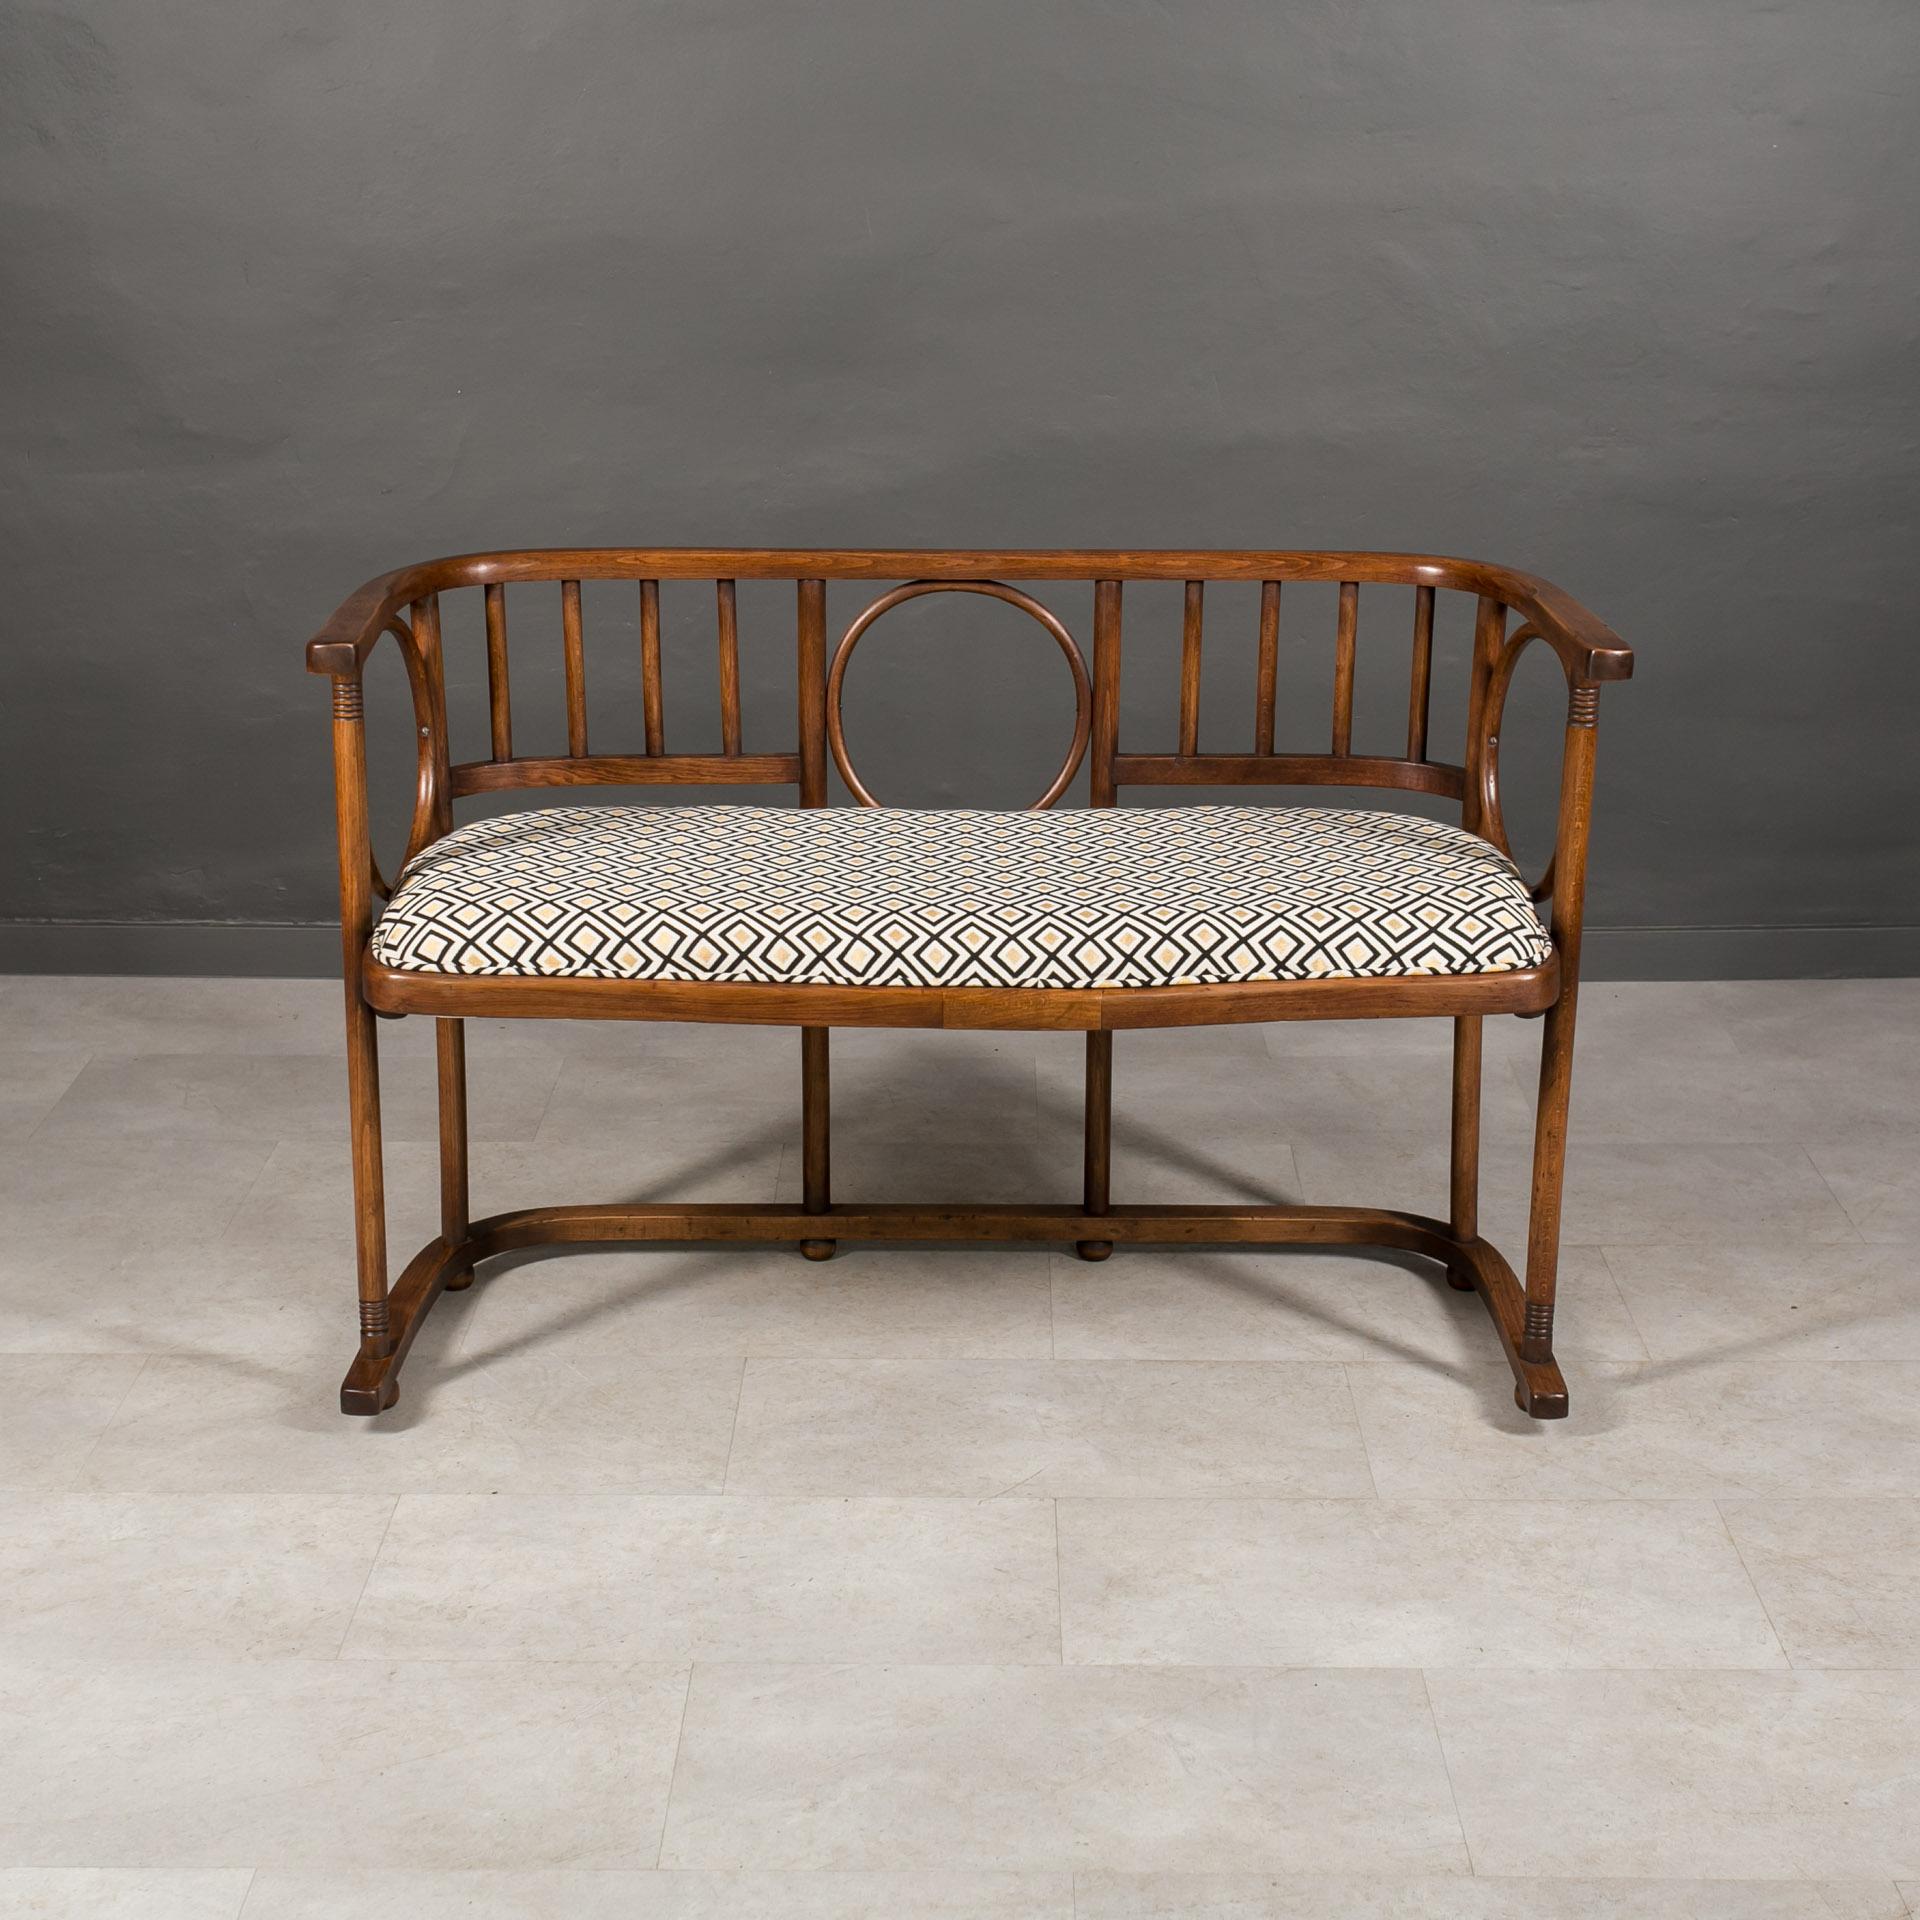 Early 20th Century Bentwood Bench Settee by J. Hoffmann for Thonet - Mundus 3